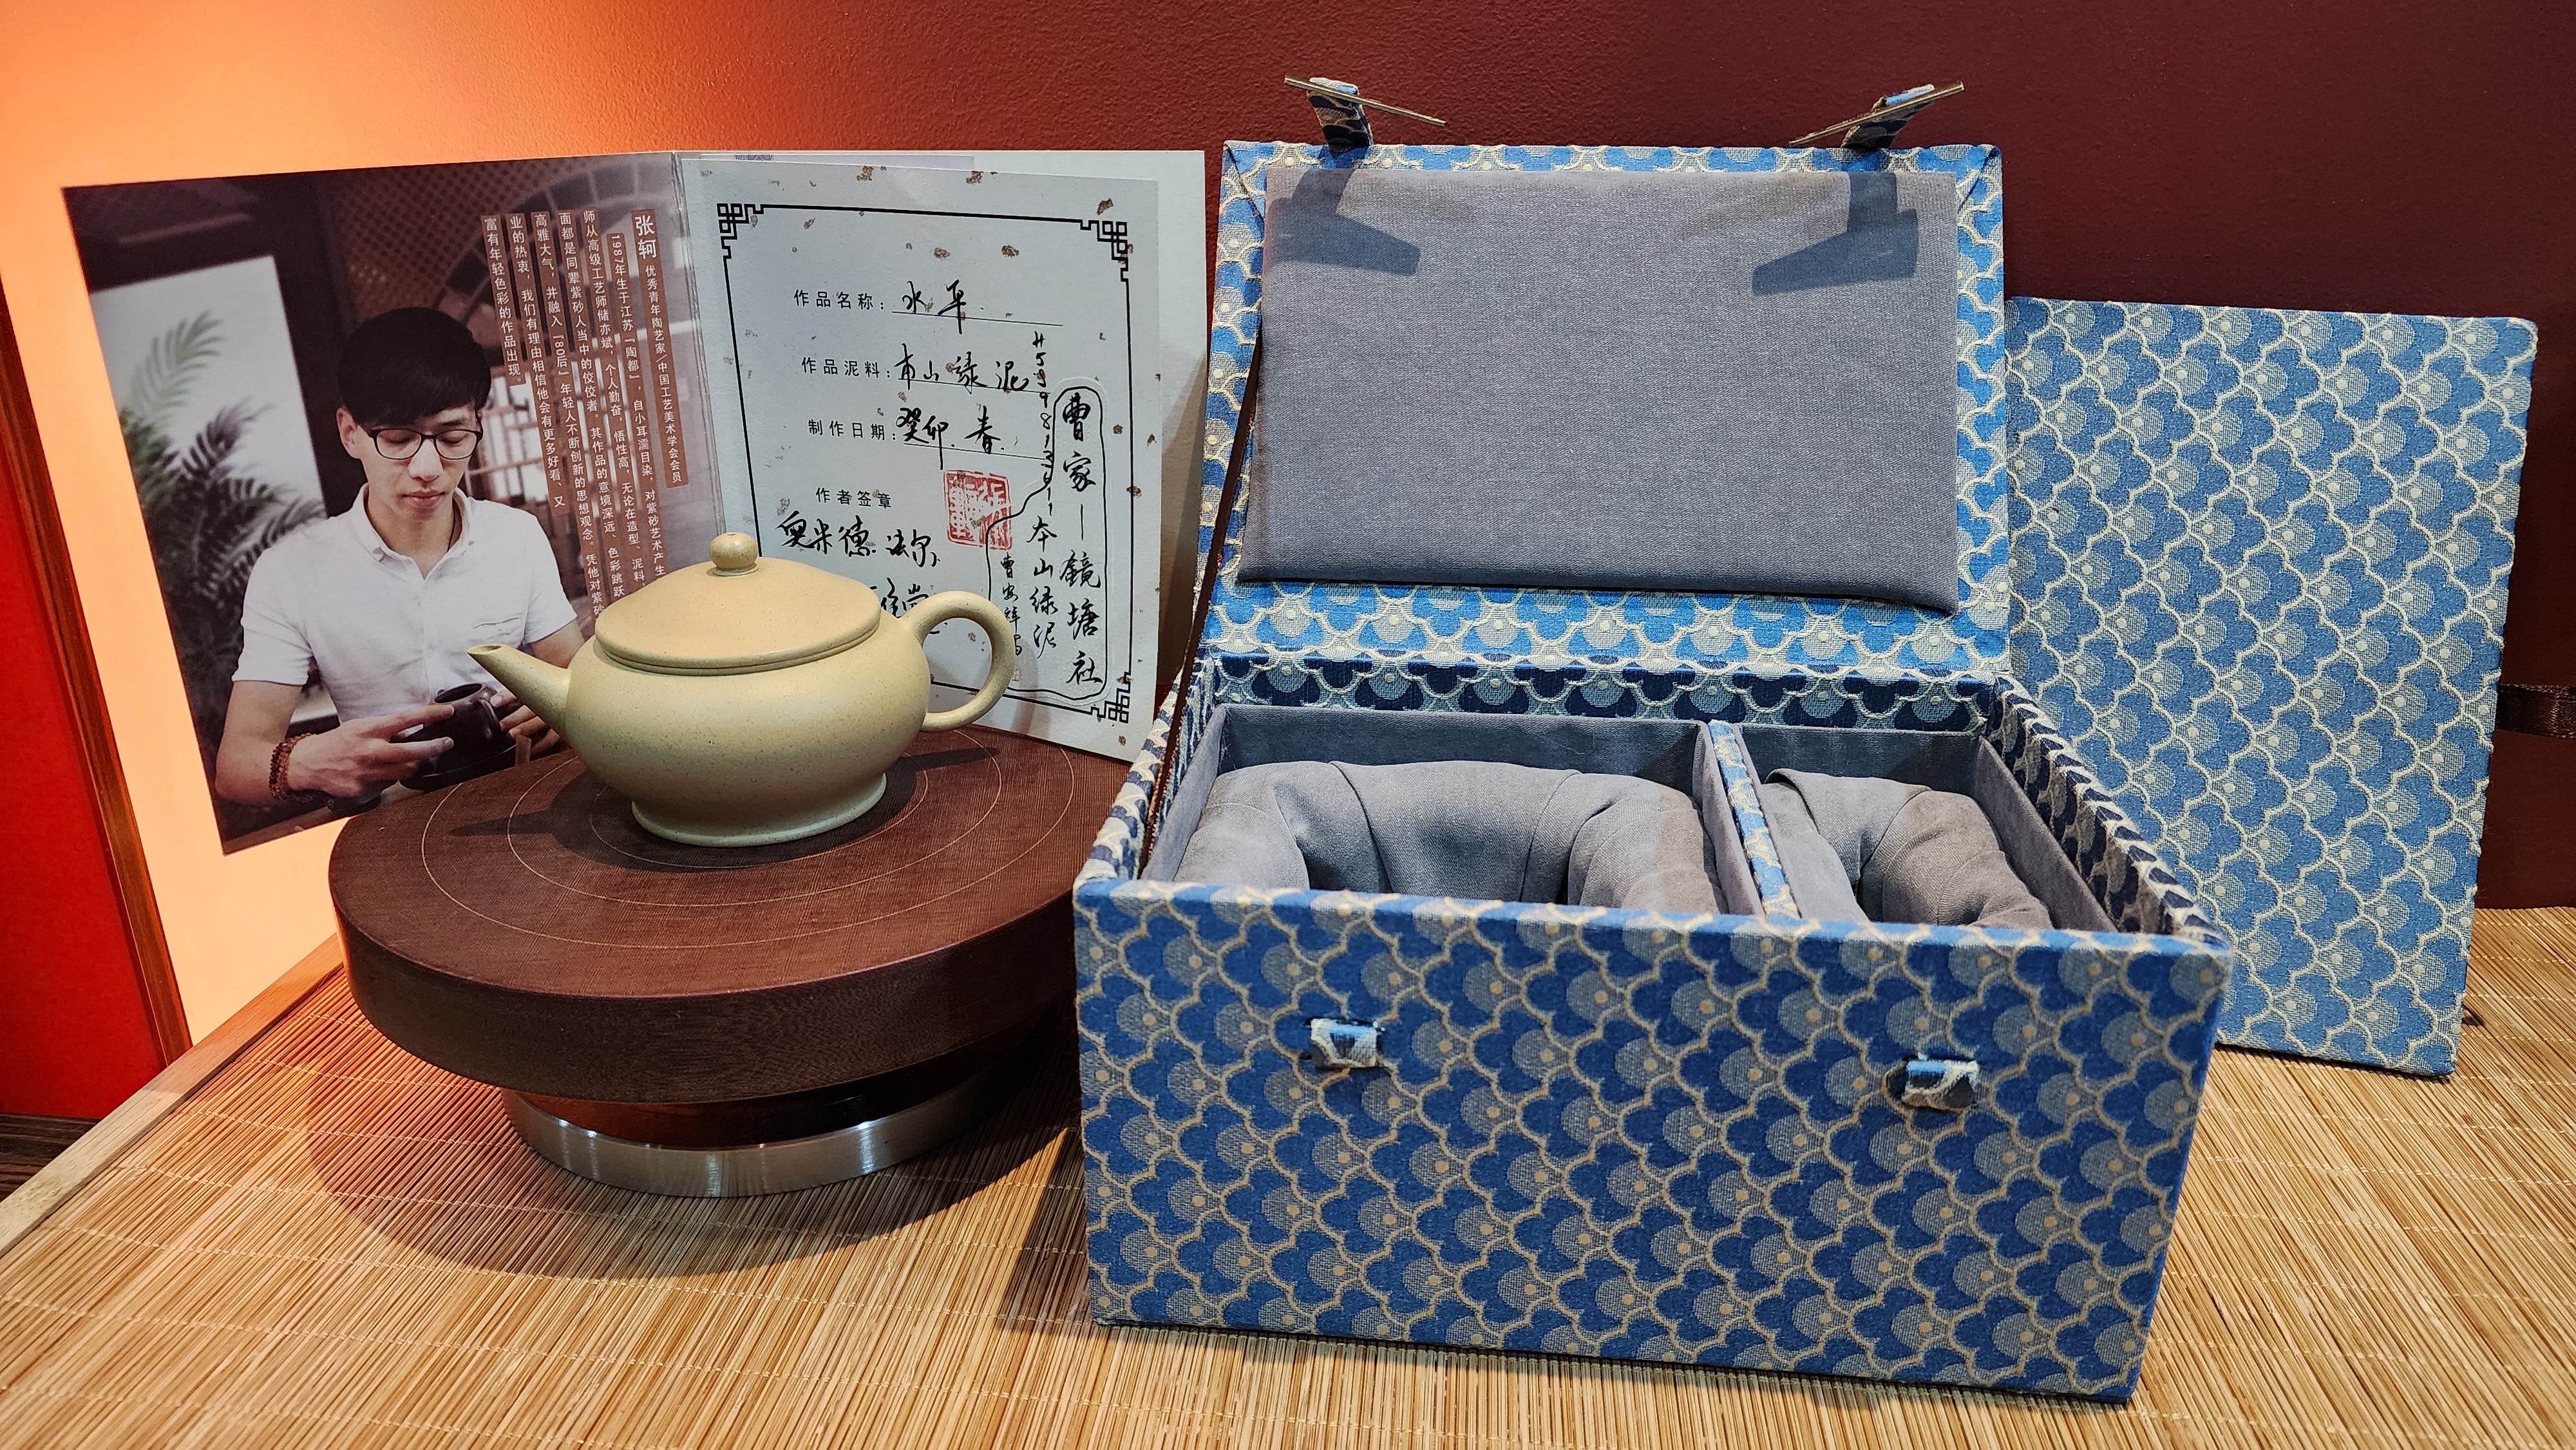 Shui Ping : Special : Exquisite *Thin-Walled*, 100% BenShan LüNi, SHUI PING Pot, 薄胎, 本山绿泥, 水平壶  made by L4 Assoc Master Artist Zhang Ke 助理工艺美术师, 张轲。- commissioned in Feb 2023 for our American patron.